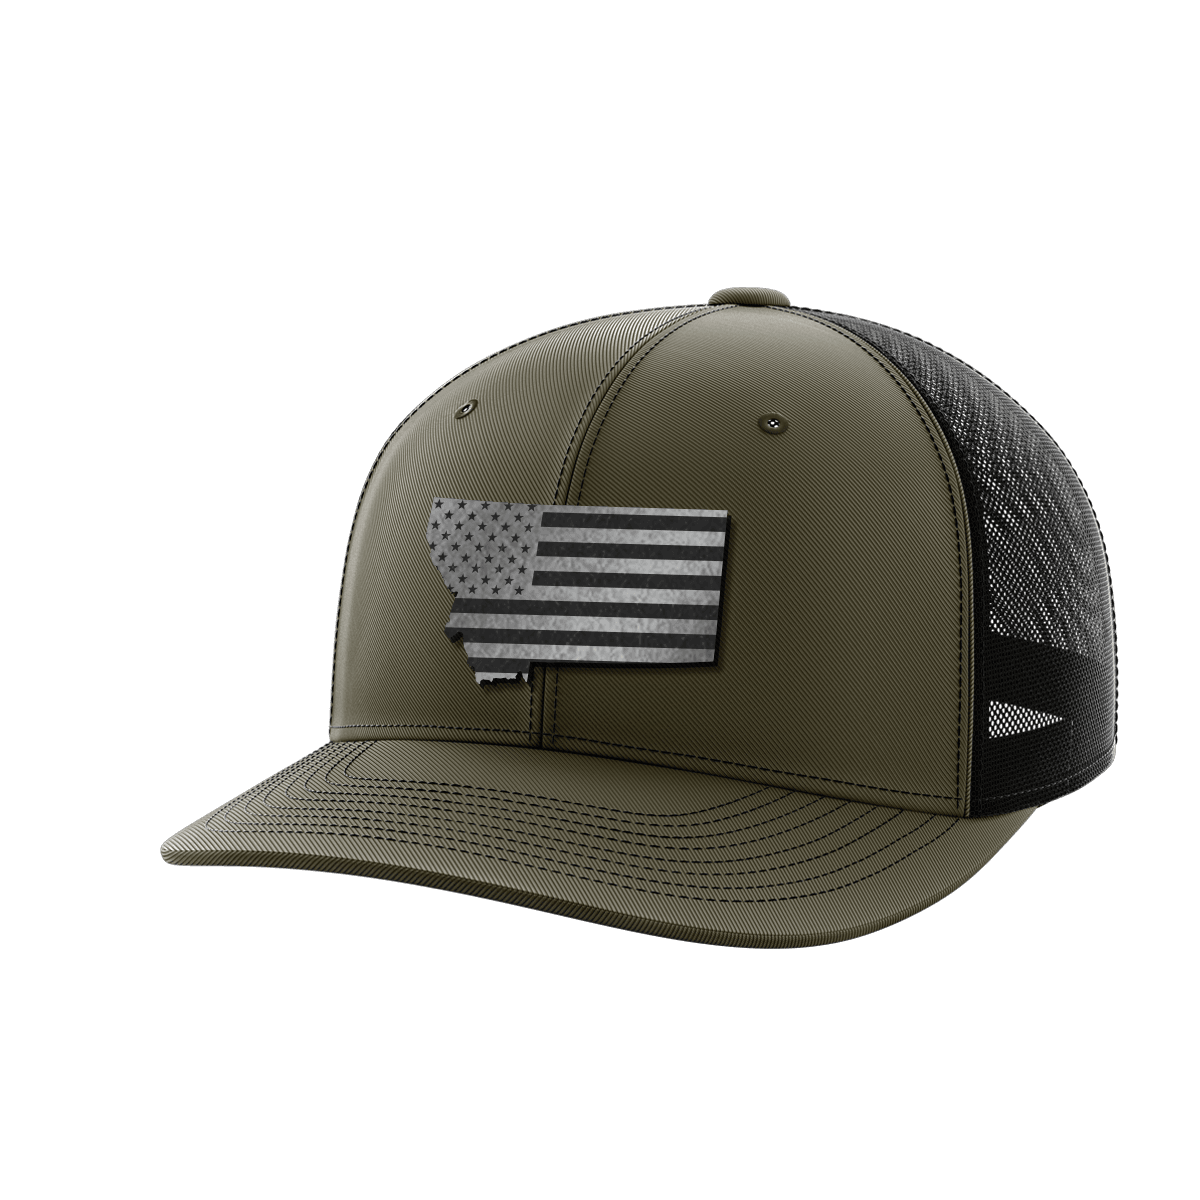 Thumbnail for Montana United Hats - Greater Half